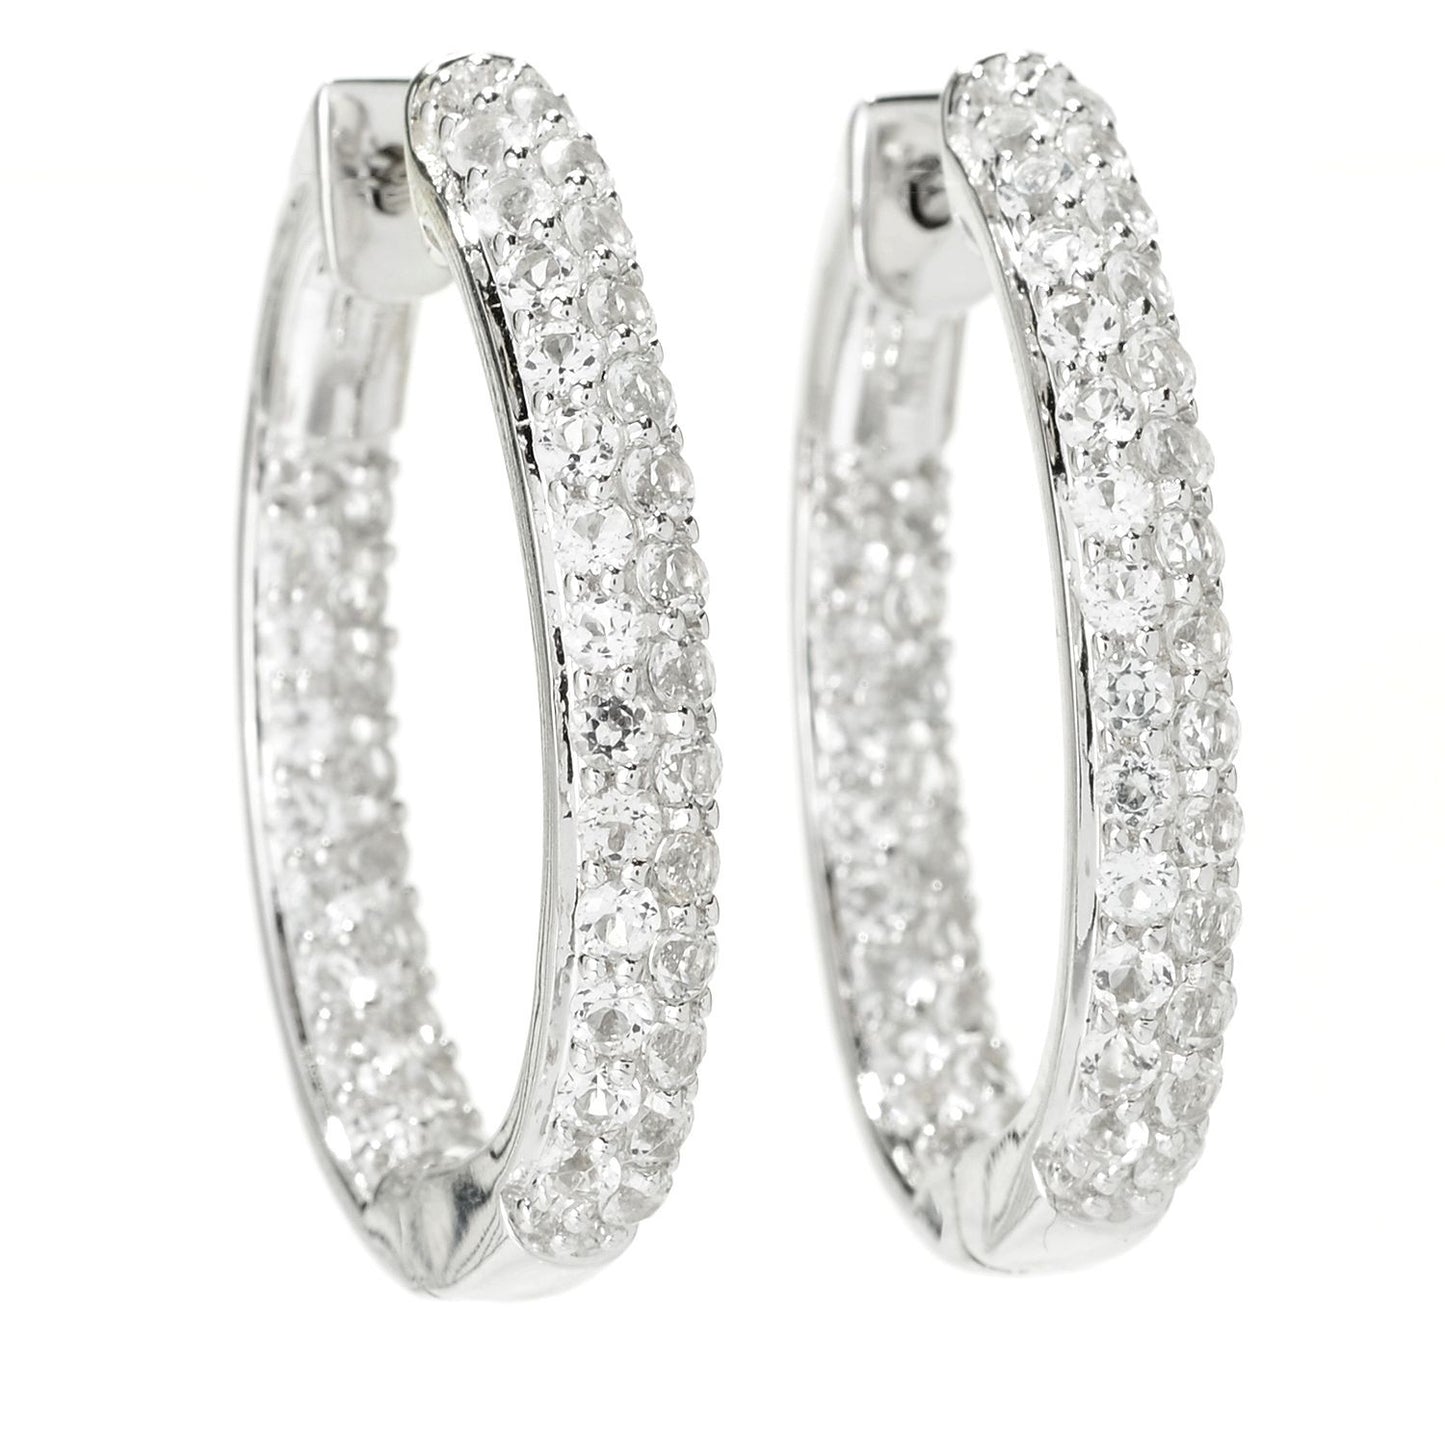 Pinctore Sterling Silver Pave White Topaz Inside-out Hoop Earrings - pinctore